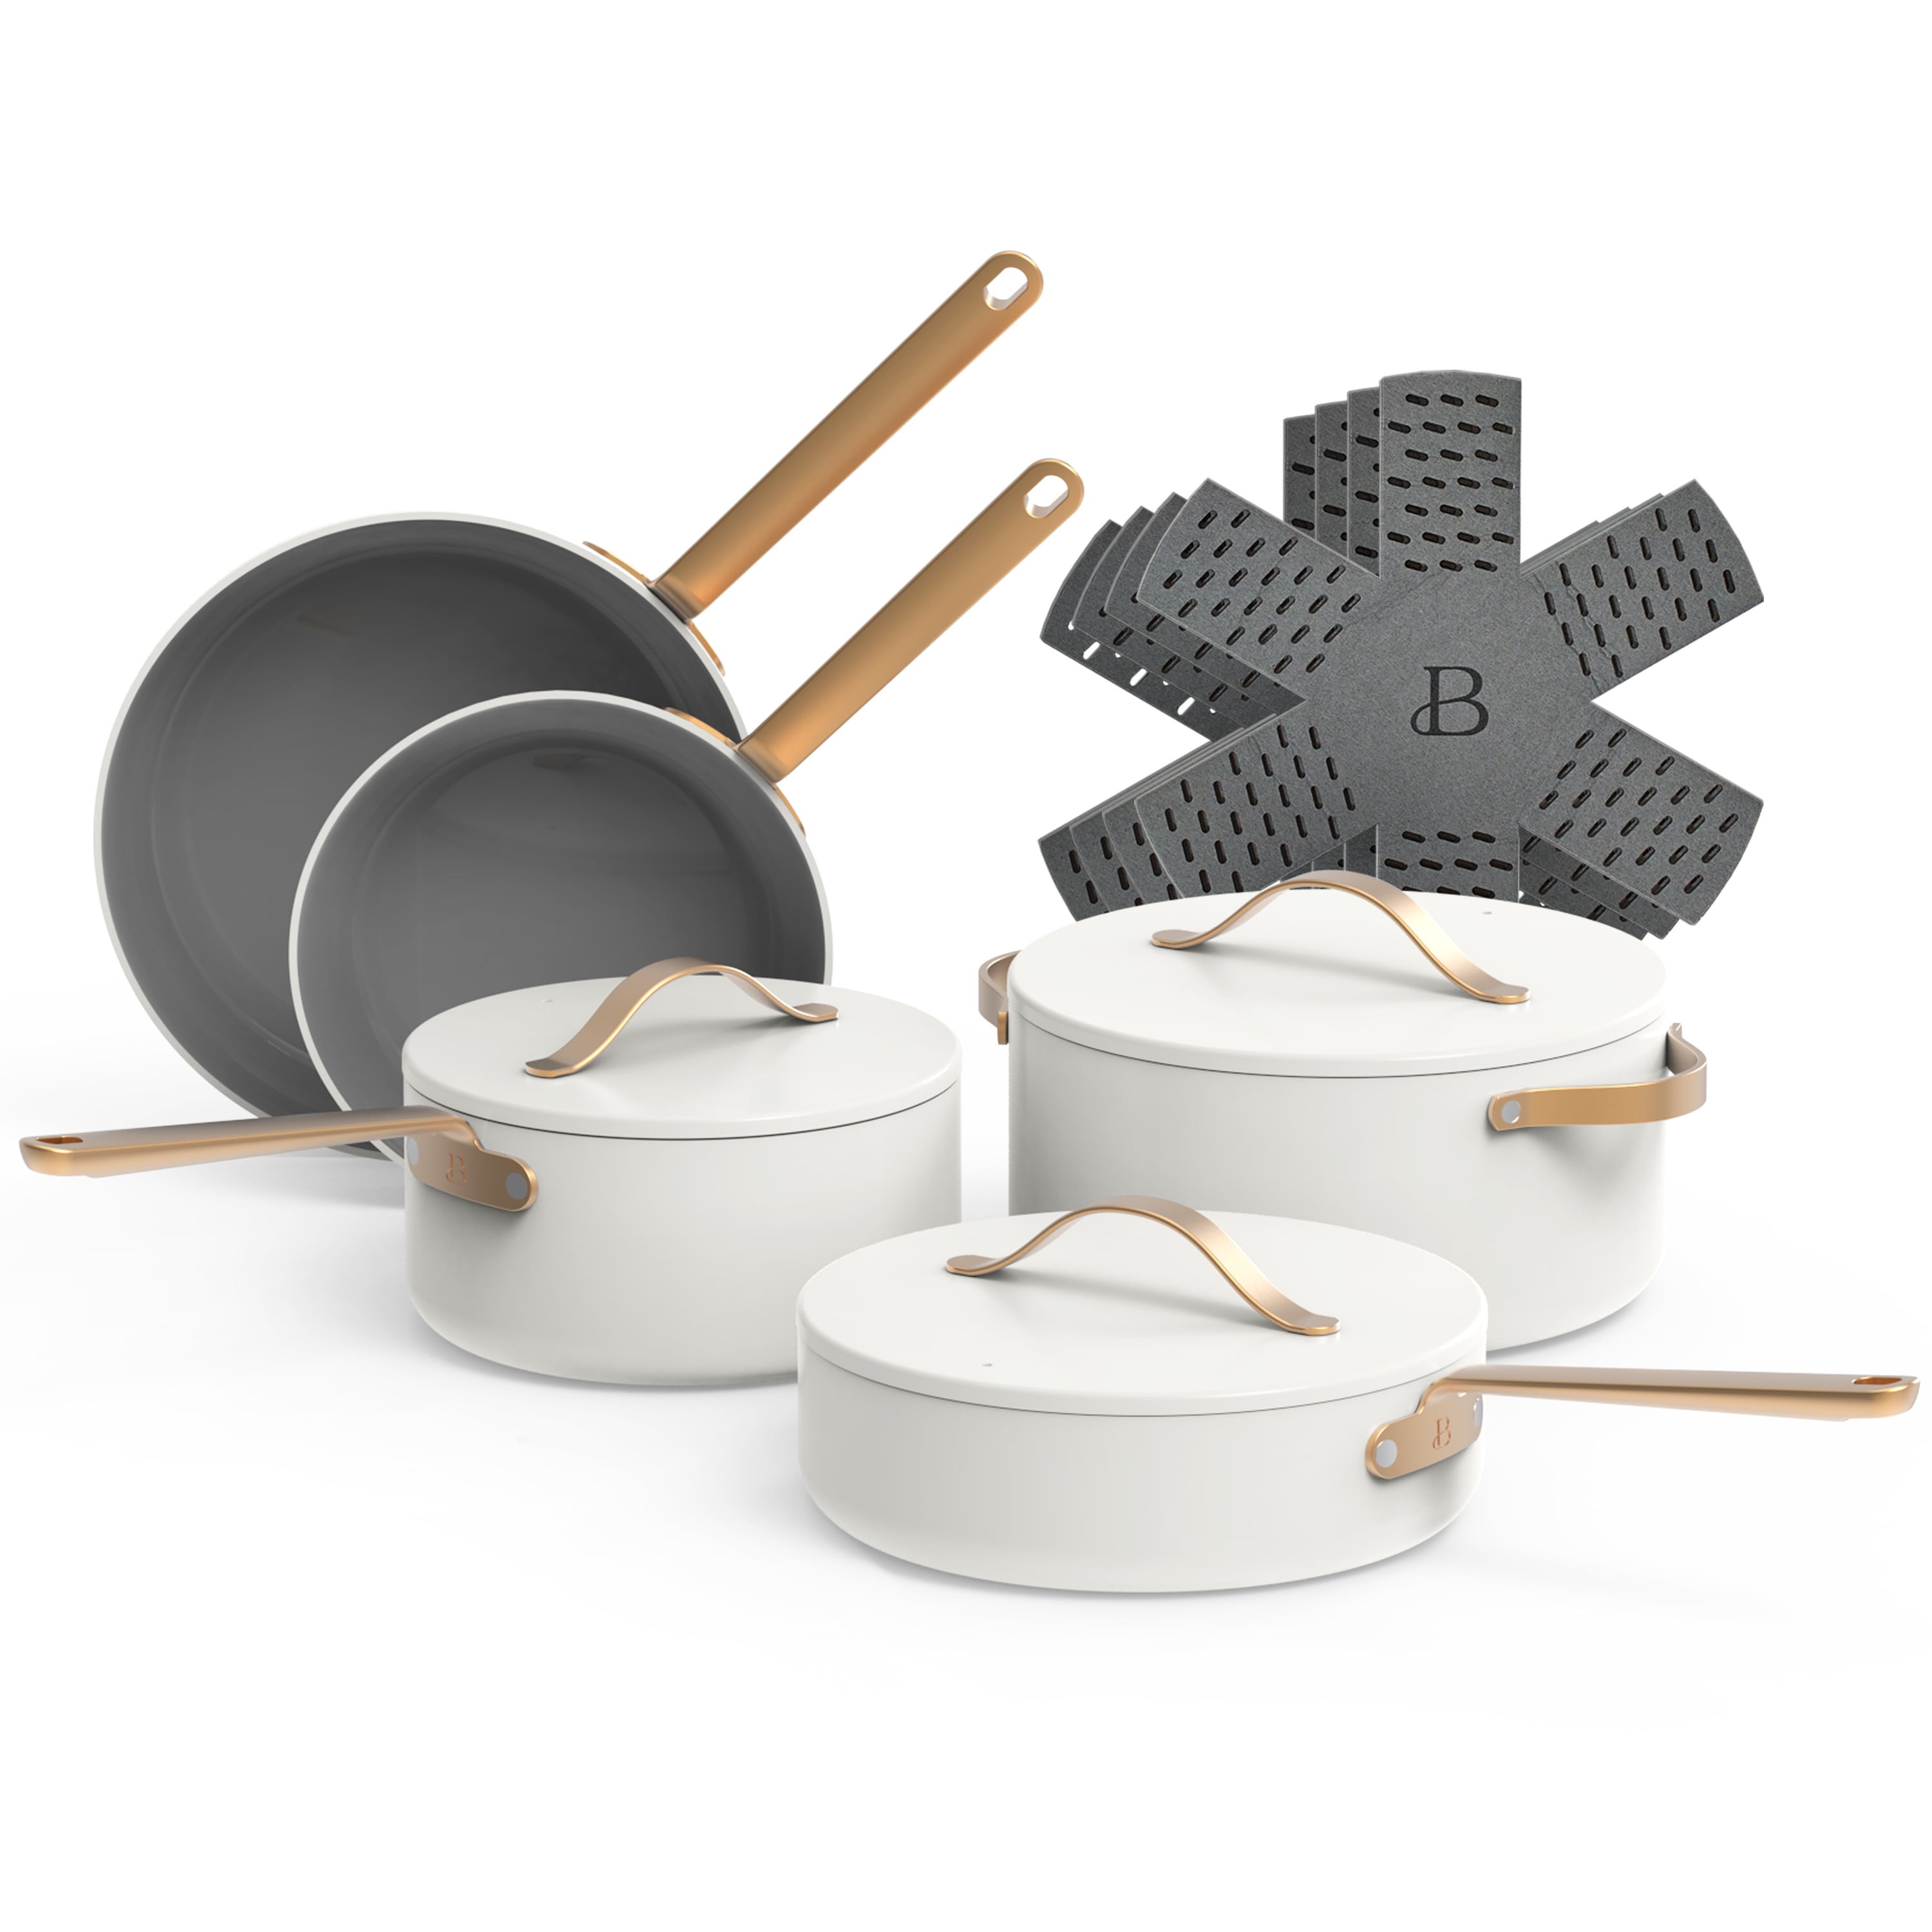 Beautiful 12pc Ceramic Non-Stick Cookware Set, White Icing by Drew Barrymore - Walmart.com